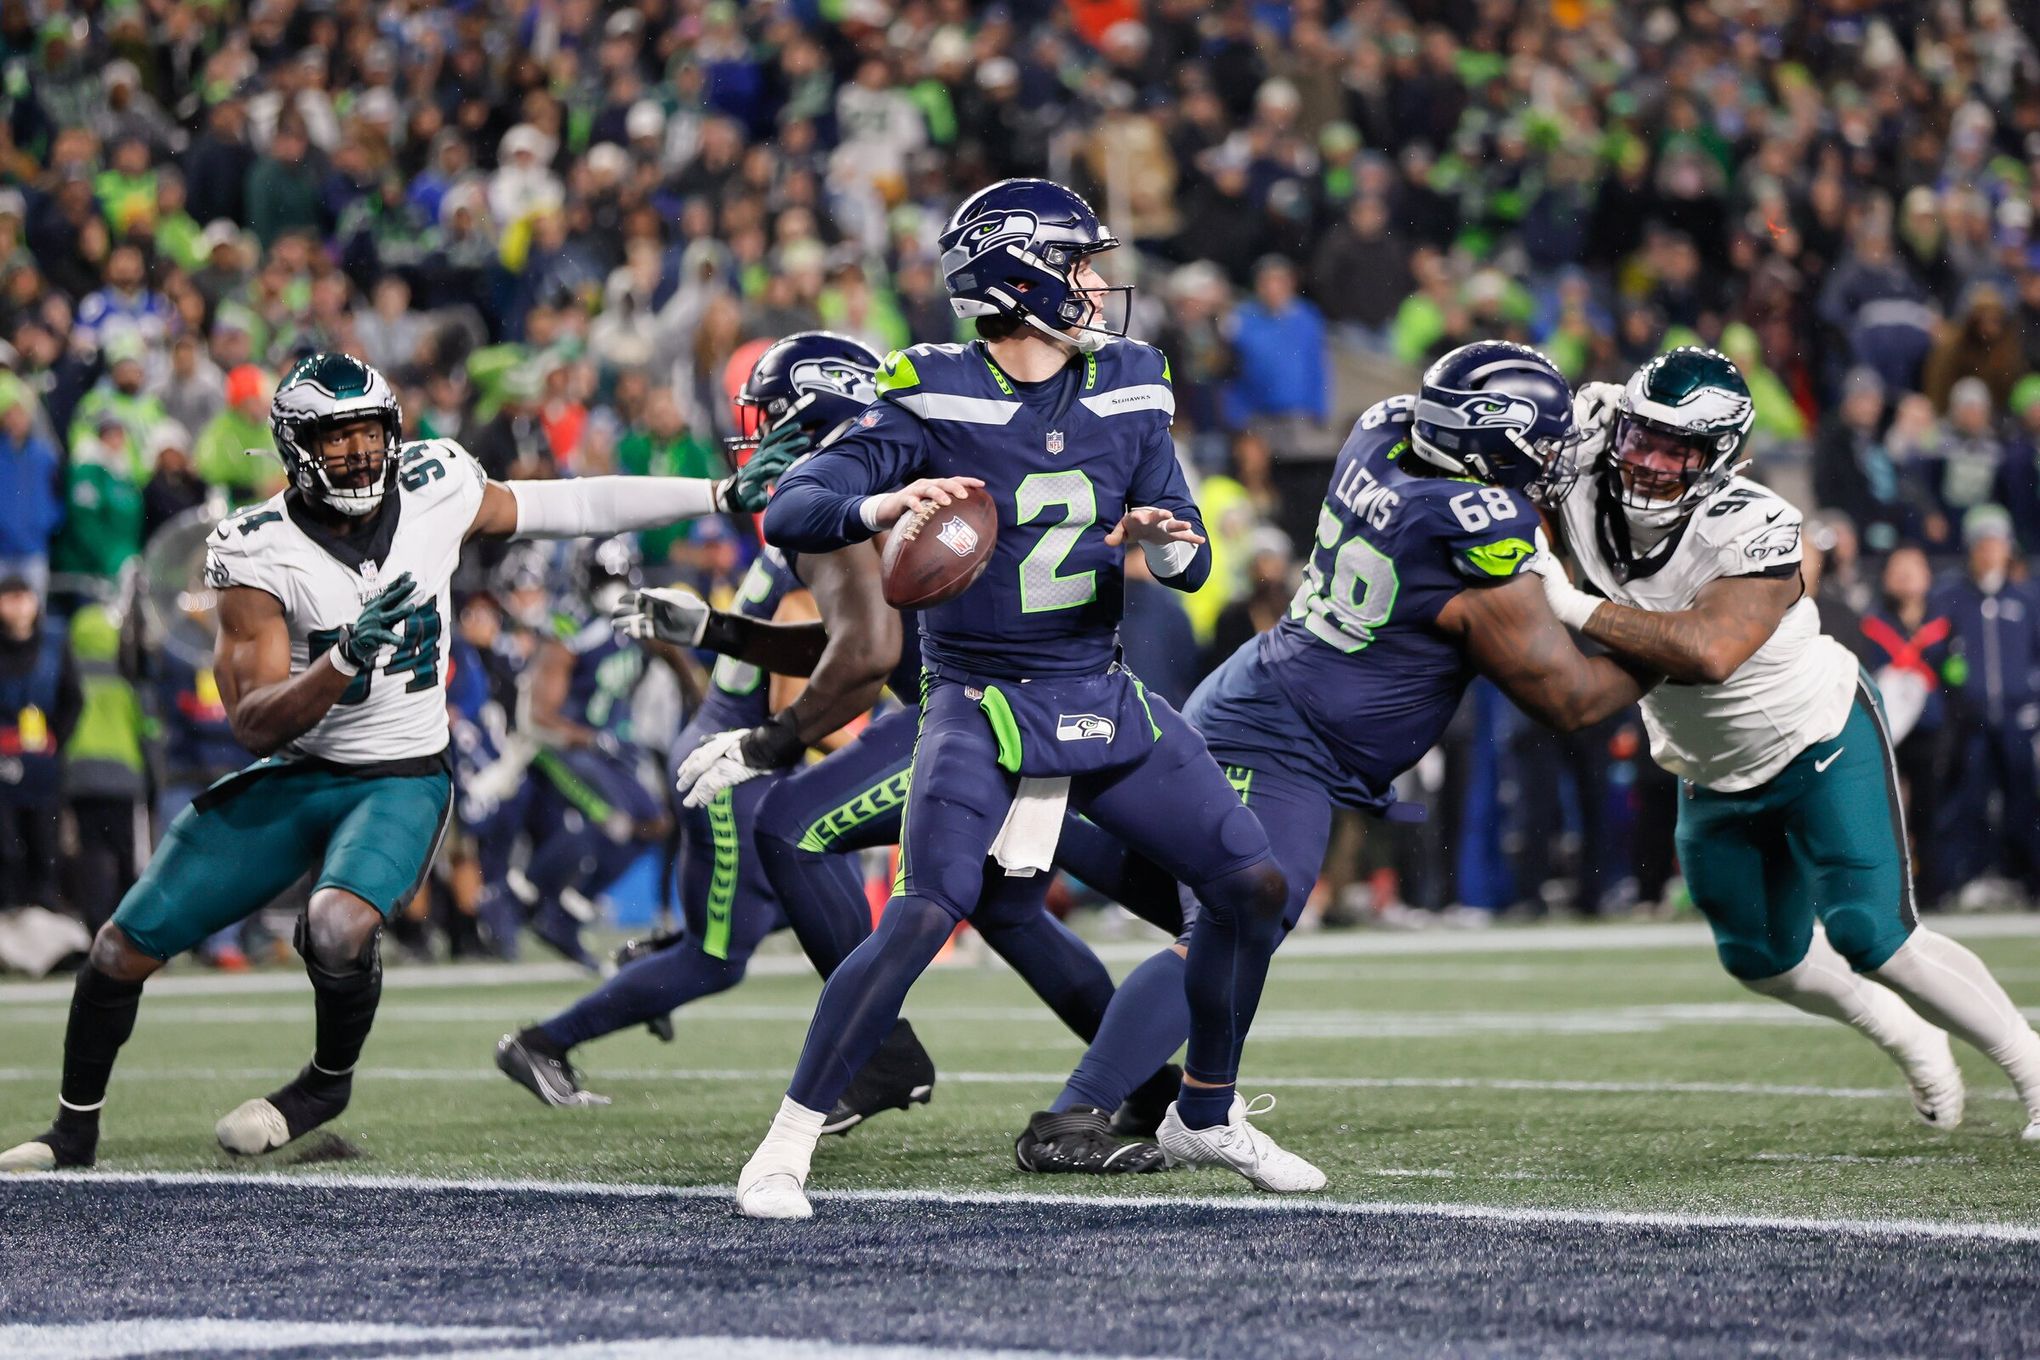 It's been awhile, but Seahawks favored on road against Titans